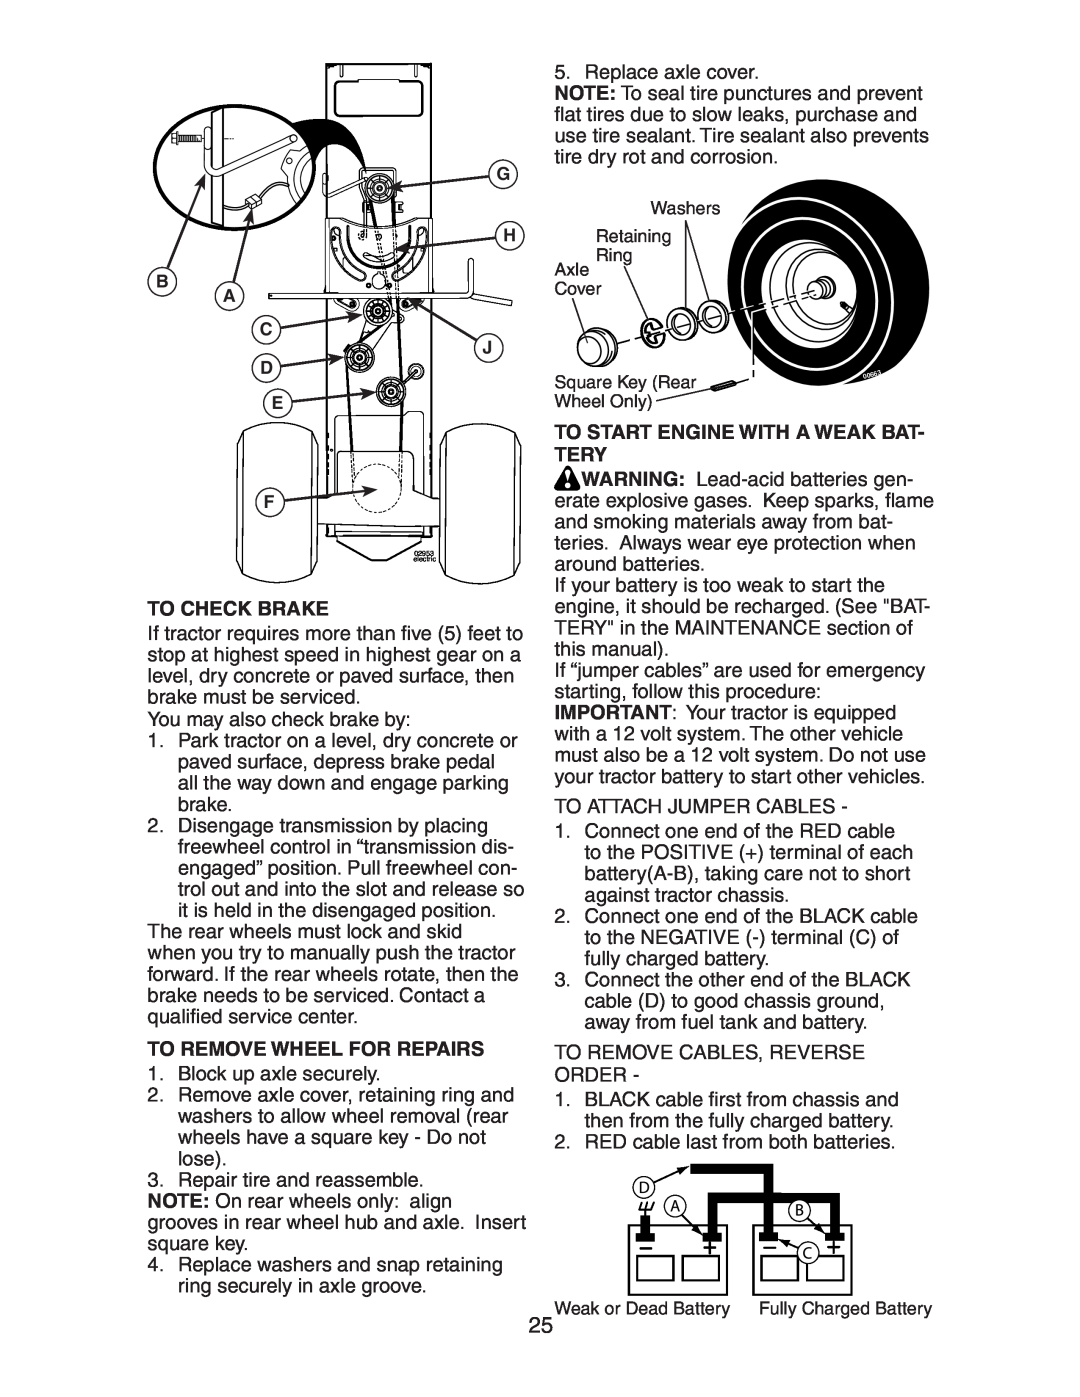 Husqvarna LOGTH2448T manual To Check Brake, To Remove Wheel For Repairs, To Start Engine With A Weak Bat- Tery 